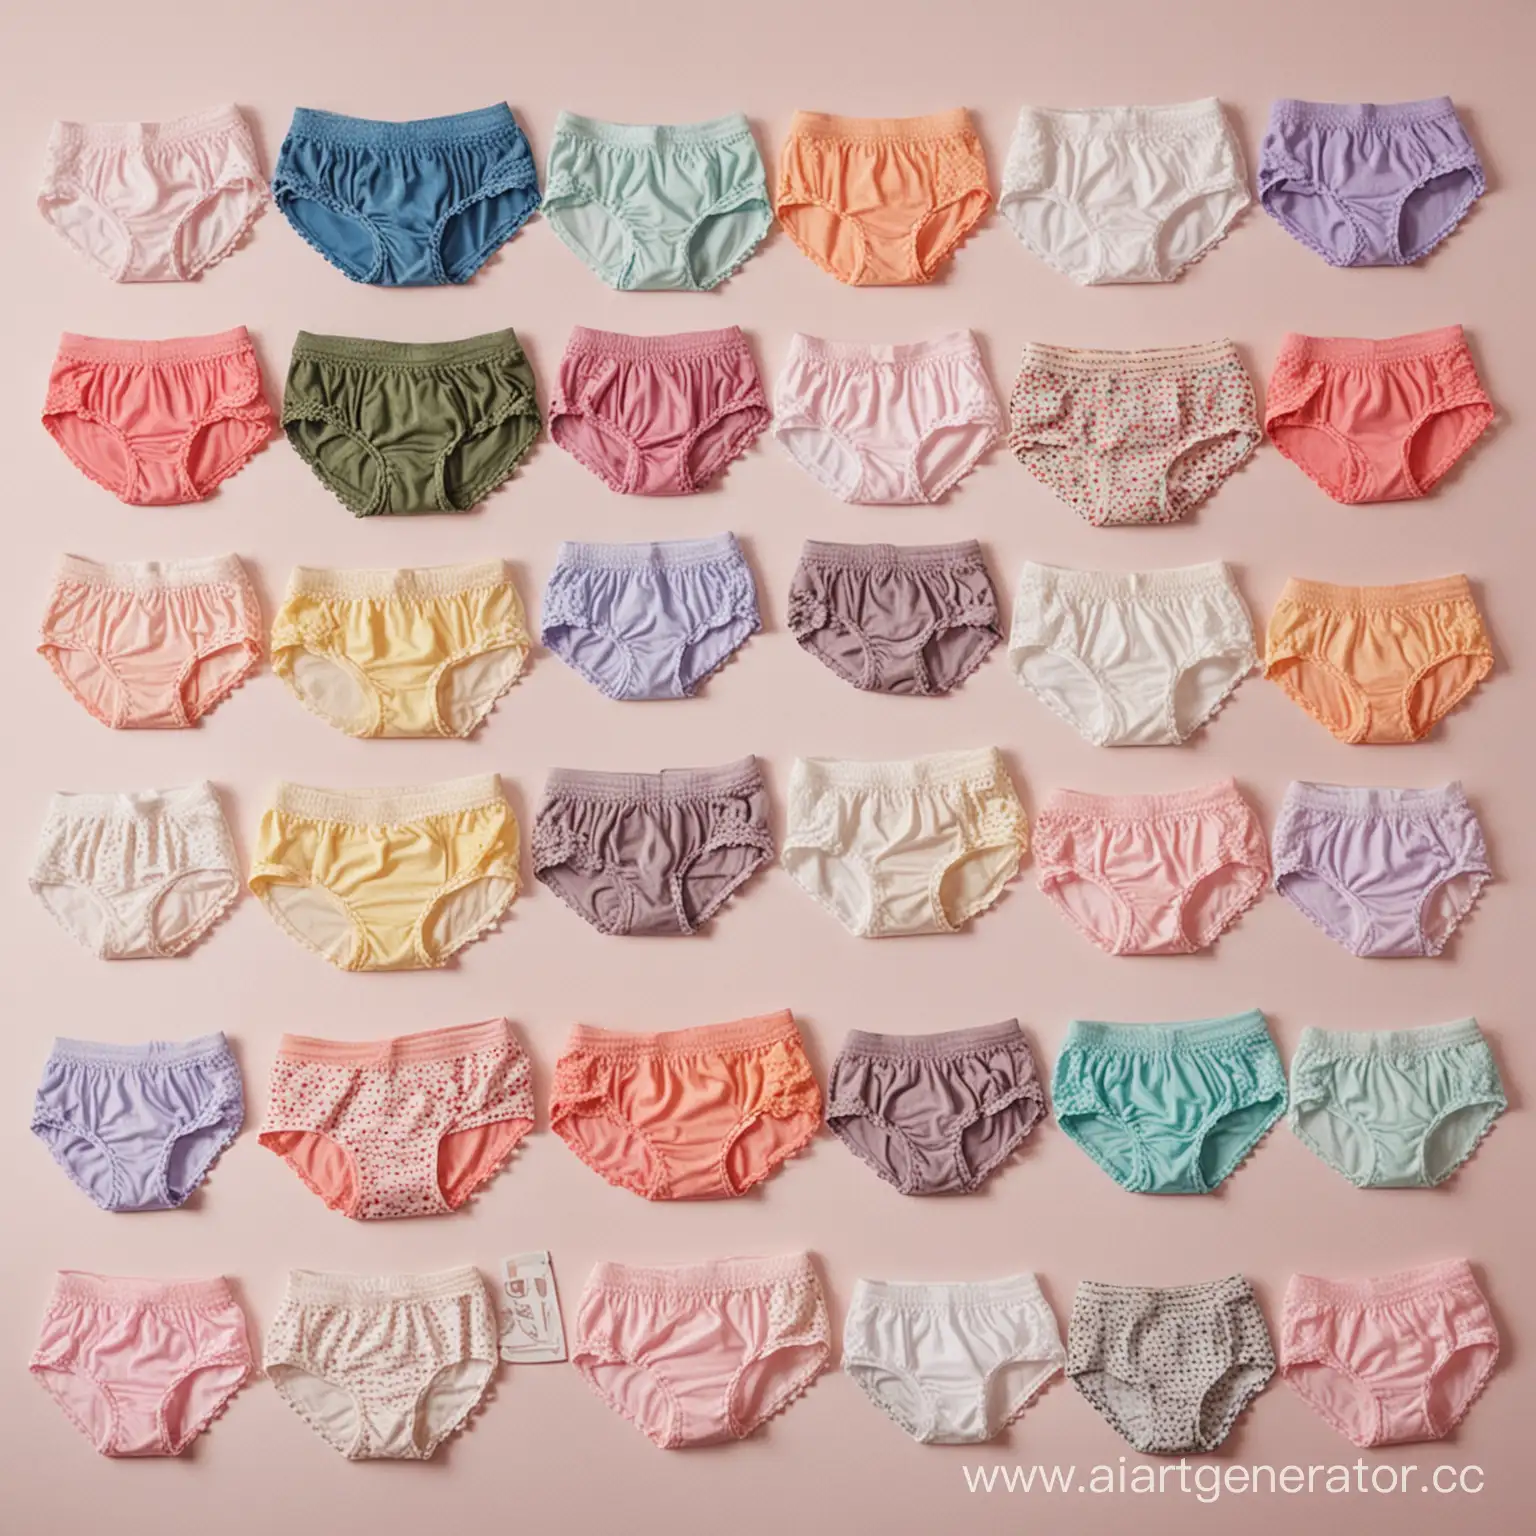 Variety-of-Panties-in-Different-Types-Styles-and-Colors-on-Neutral-Background